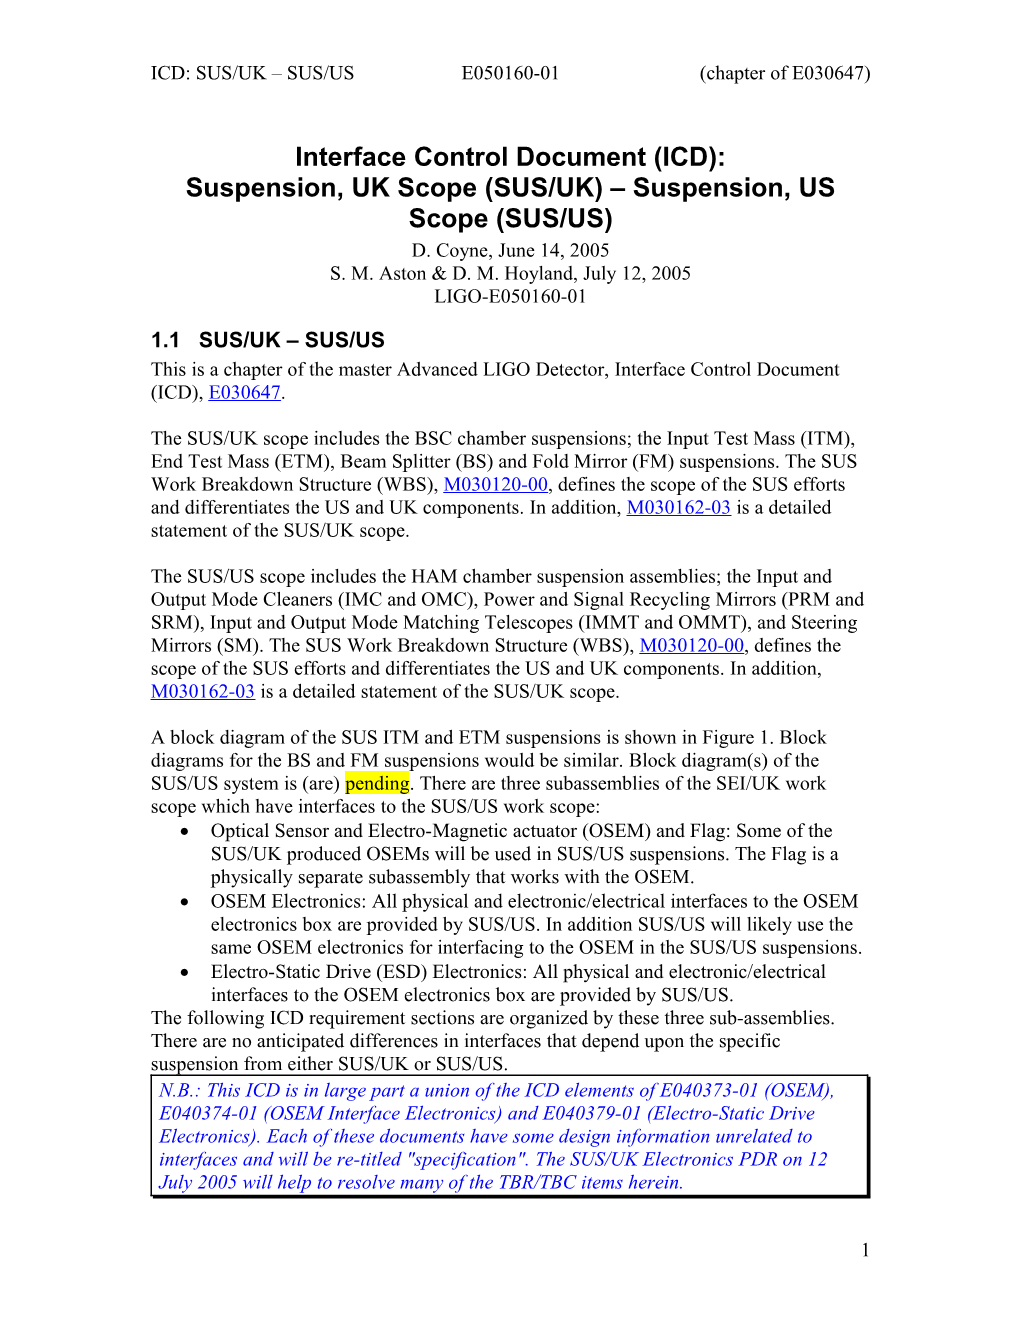 ICD: SUS/UK SUS/US E050160-01 (Chapter of E030647)